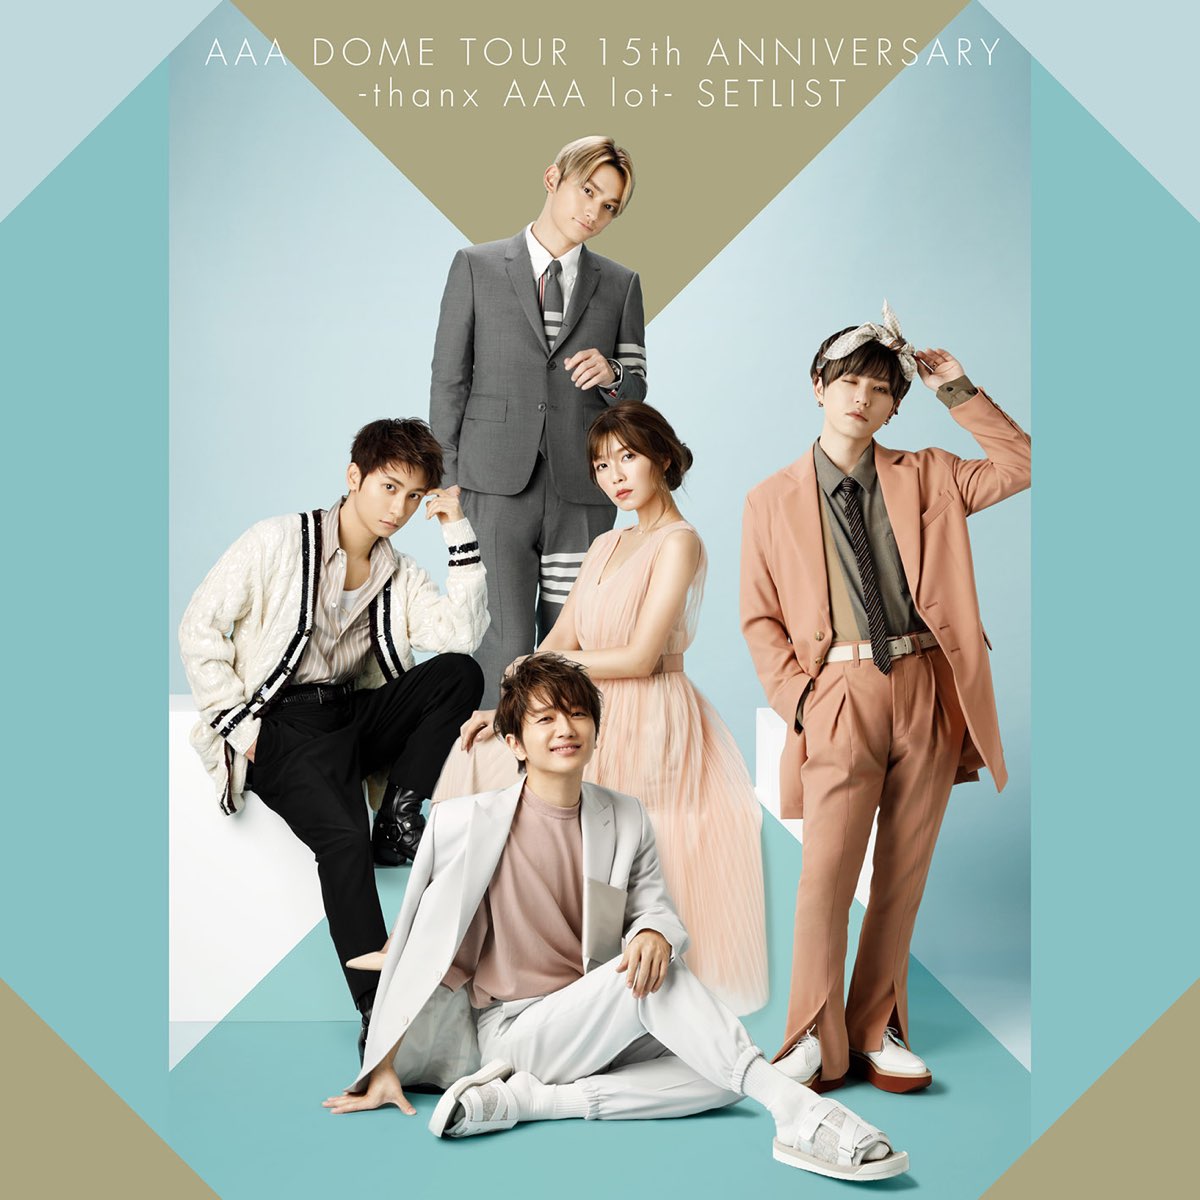 AAA DOME TOUR 15th ANNIVERSARY -thanx AAA lot- SETLIST by AAA on 